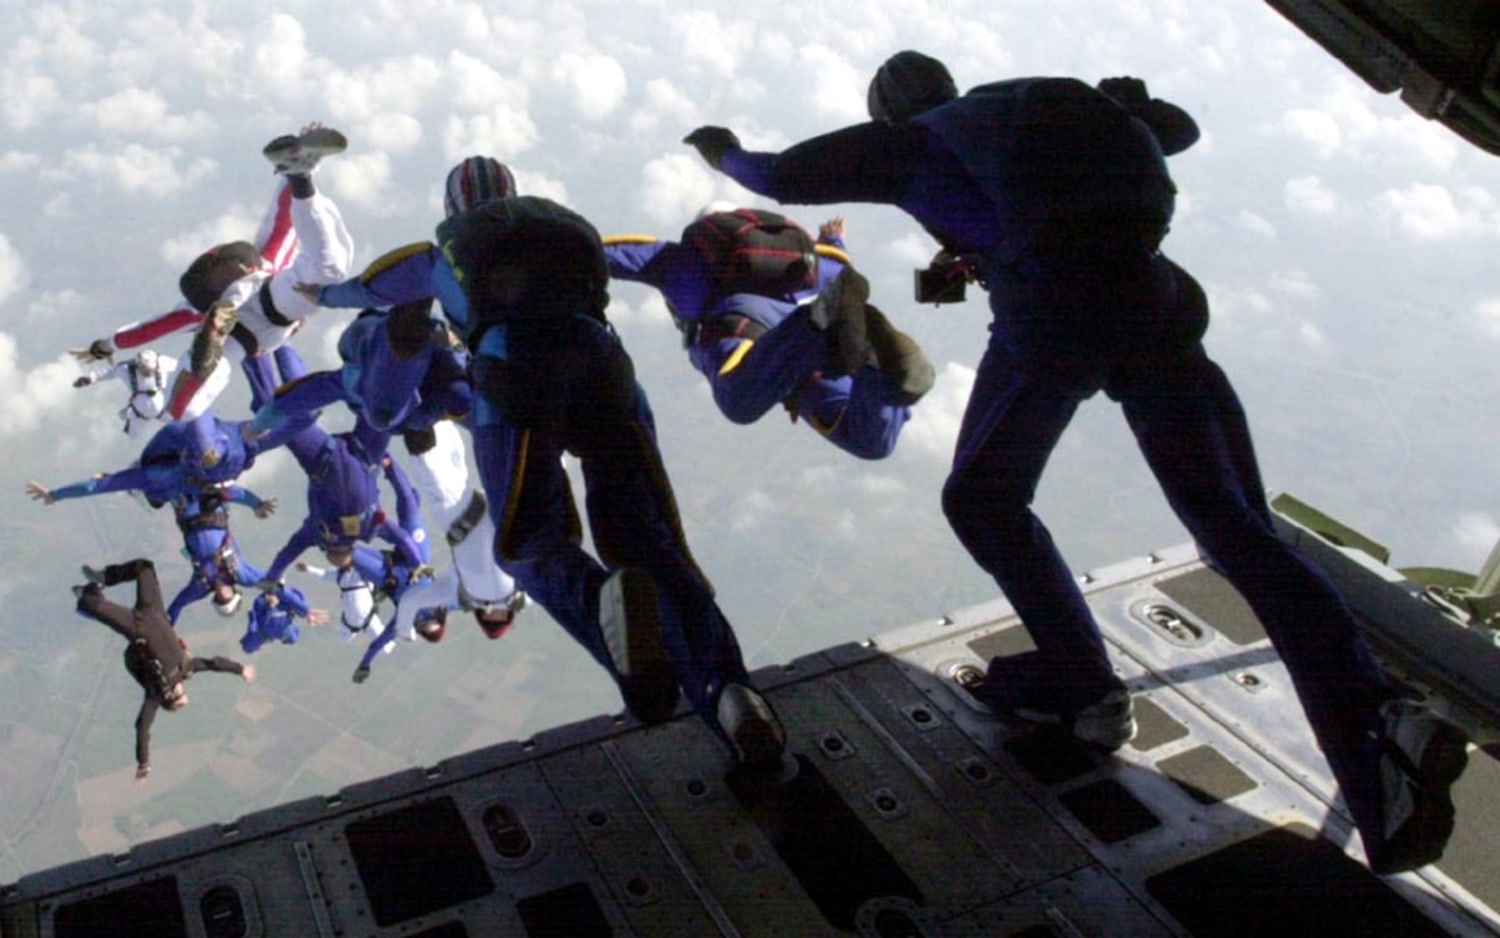 What to ask before jumping out of a plane at 13,000 feet